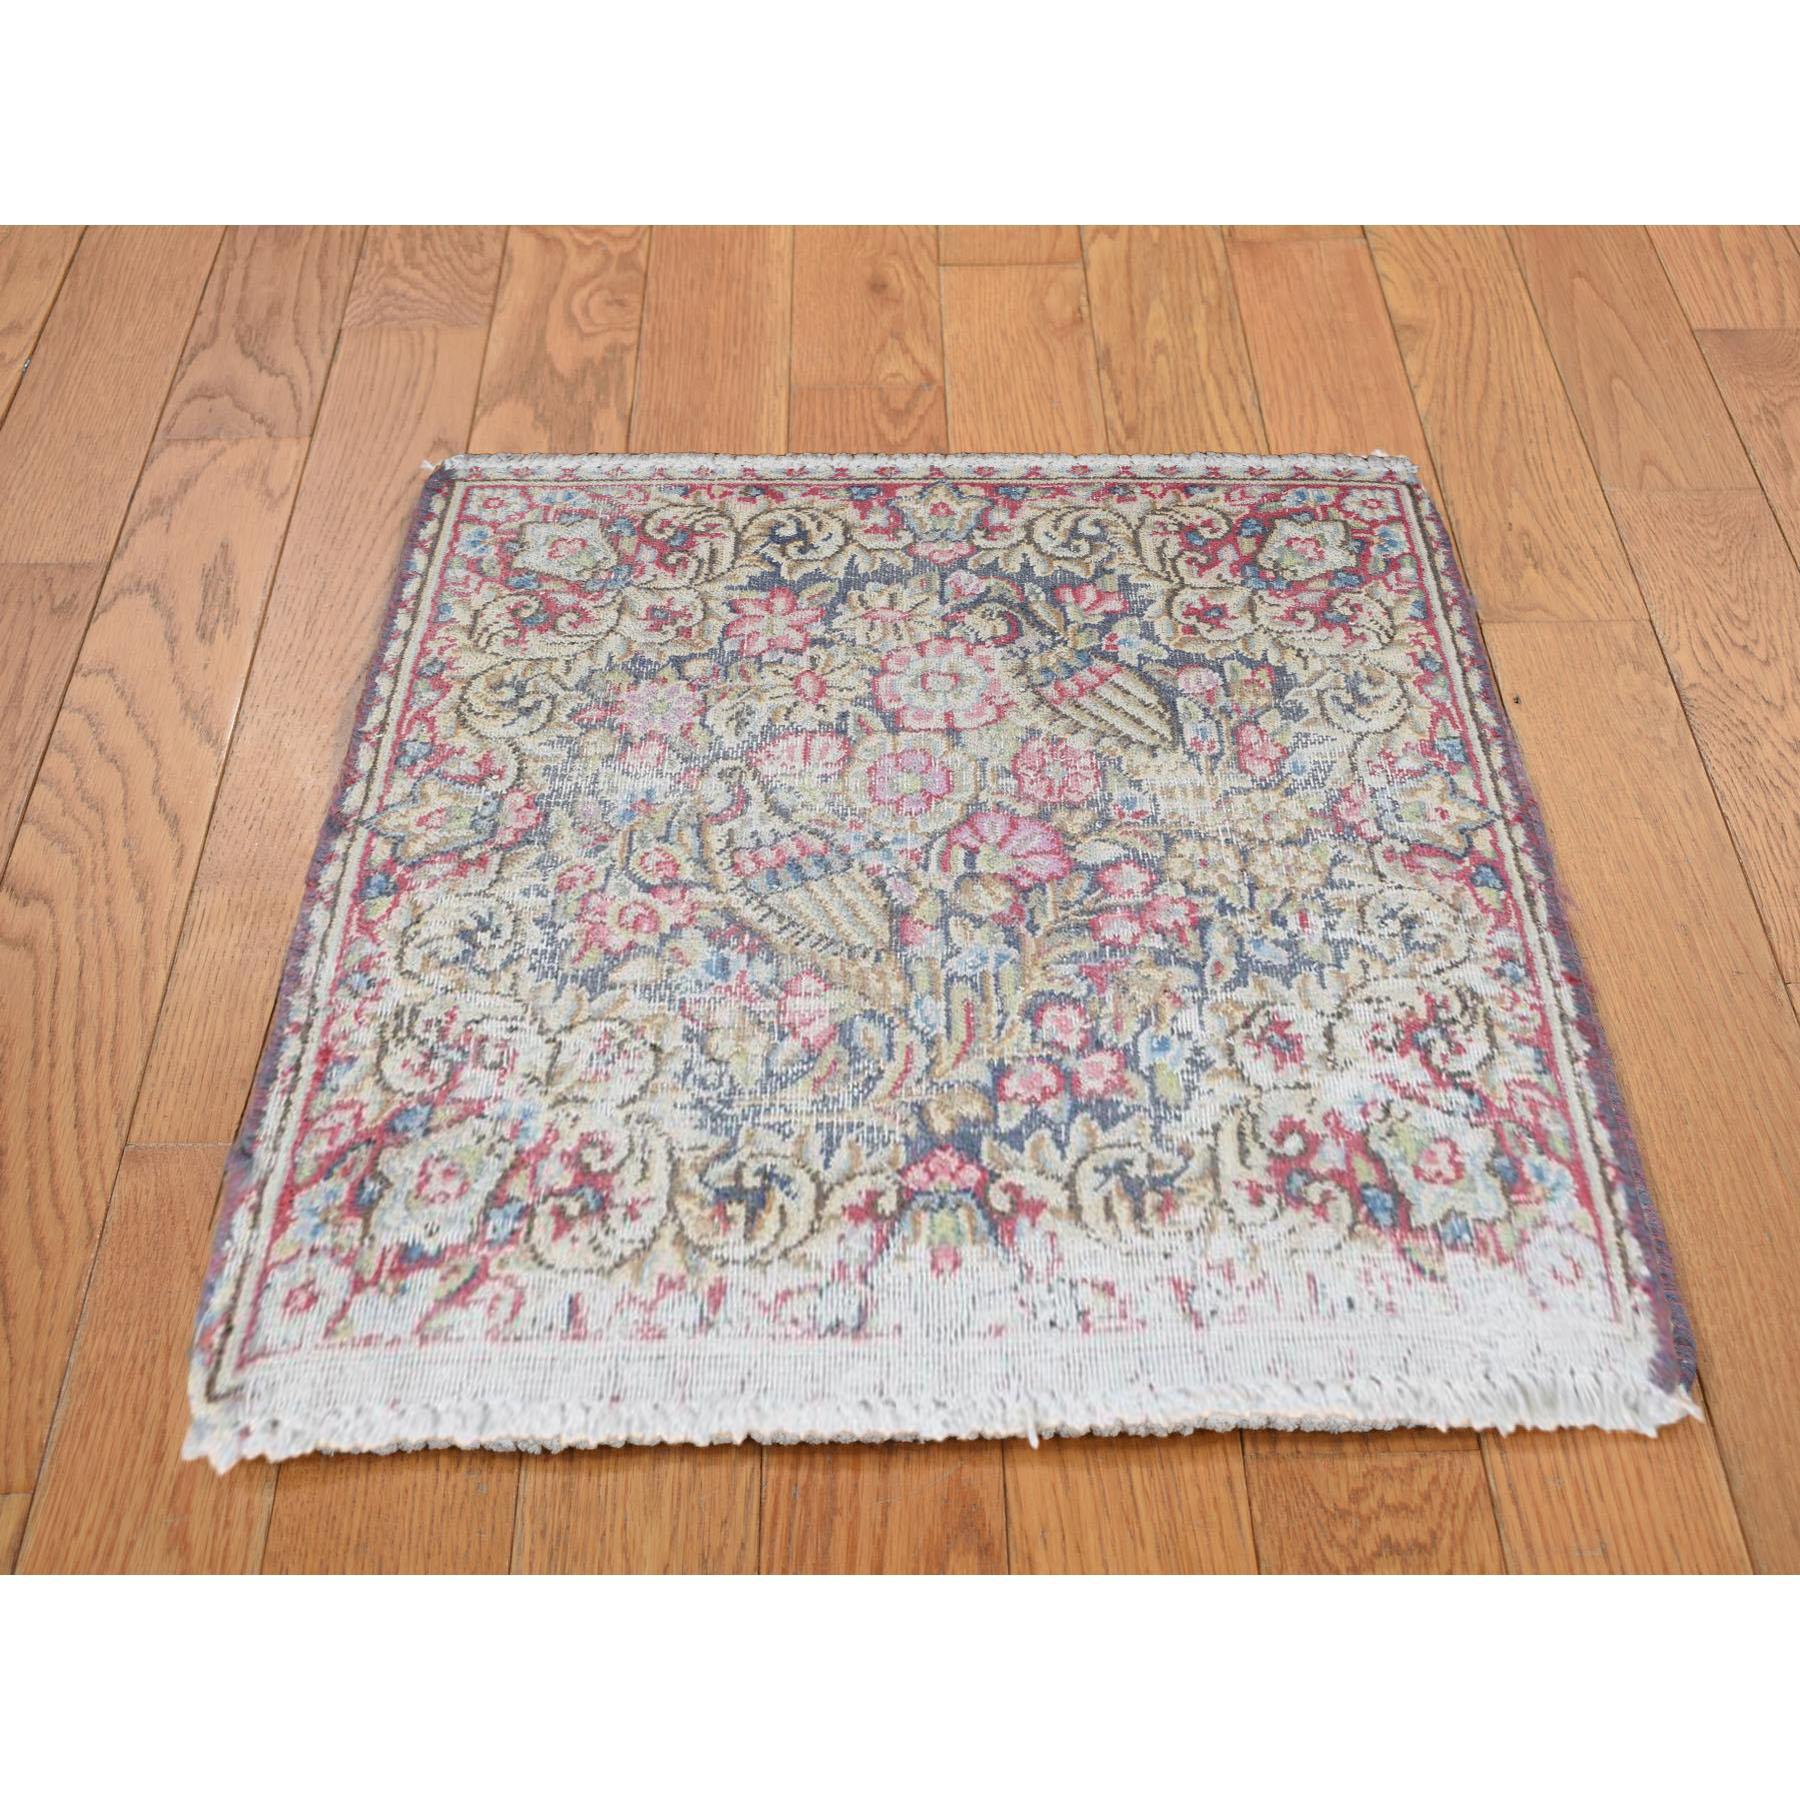 This fabulous Hand-Knotted carpet has been created and designed for extra strength and durability. This rug has been handcrafted for weeks in the traditional method that is used to make
Exact Rug Size in Feet and Inches : 1'9